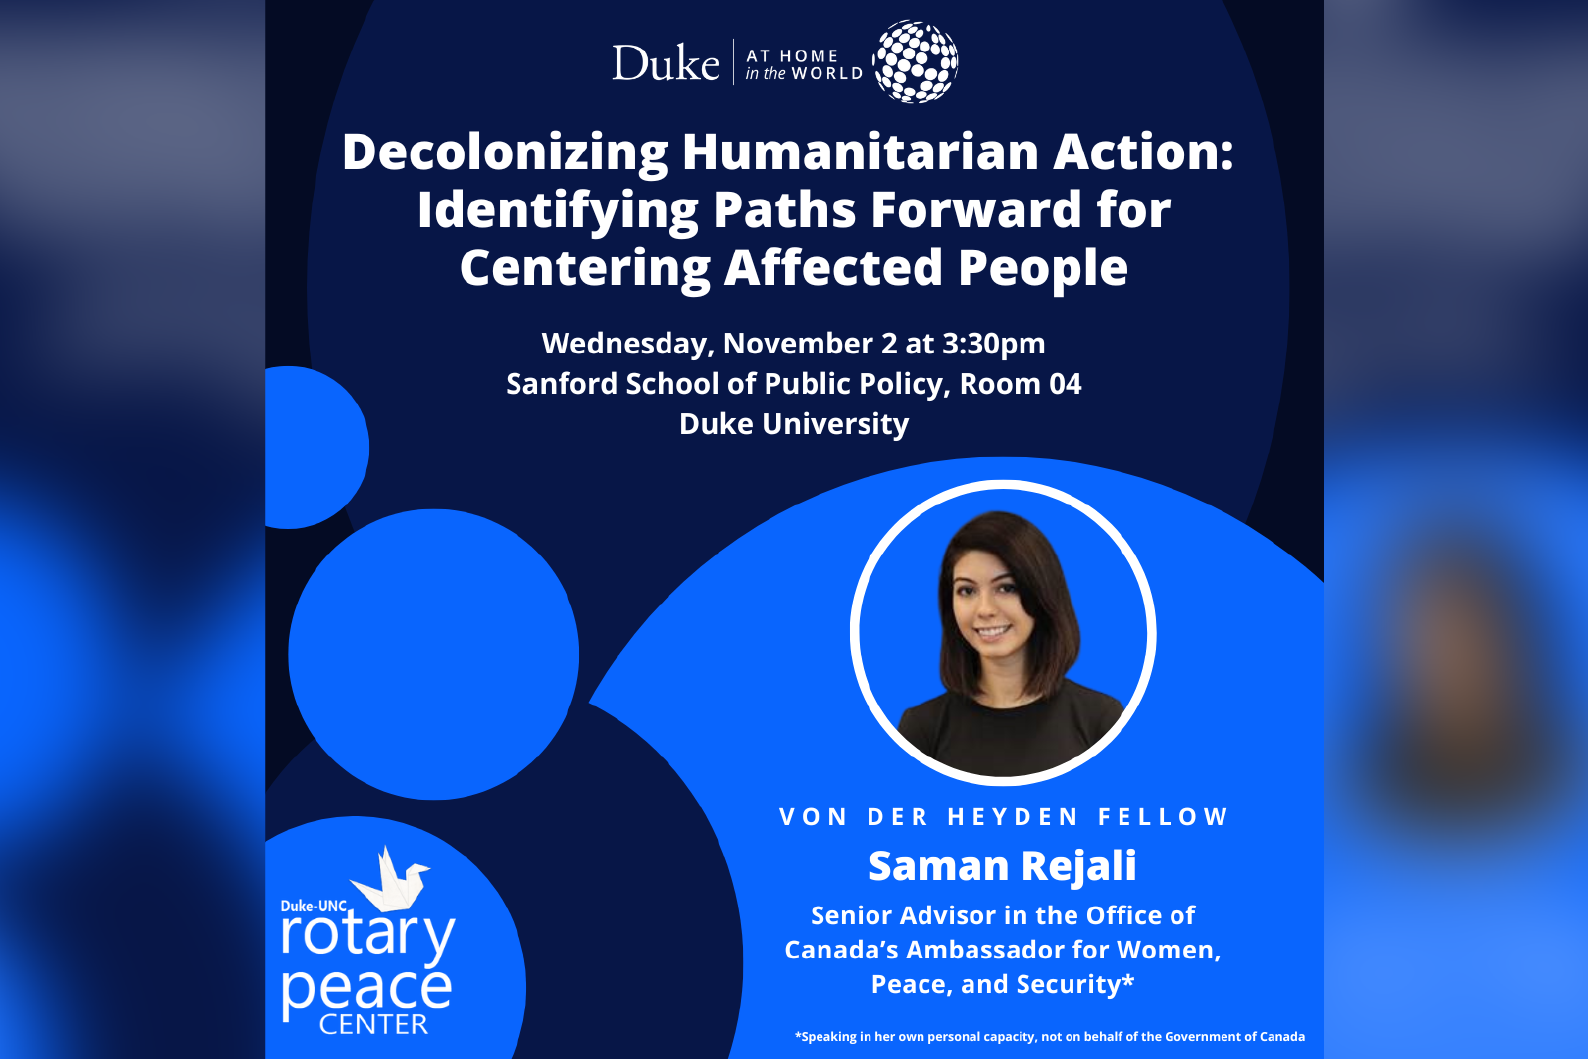 Decolonizing Humanitarian Action: Identifying Paths Forward for Centering Affected People Wednesday, November 2nd, 3:30 - 4:30 p.m. Sanford School of Public Policy, Room 04